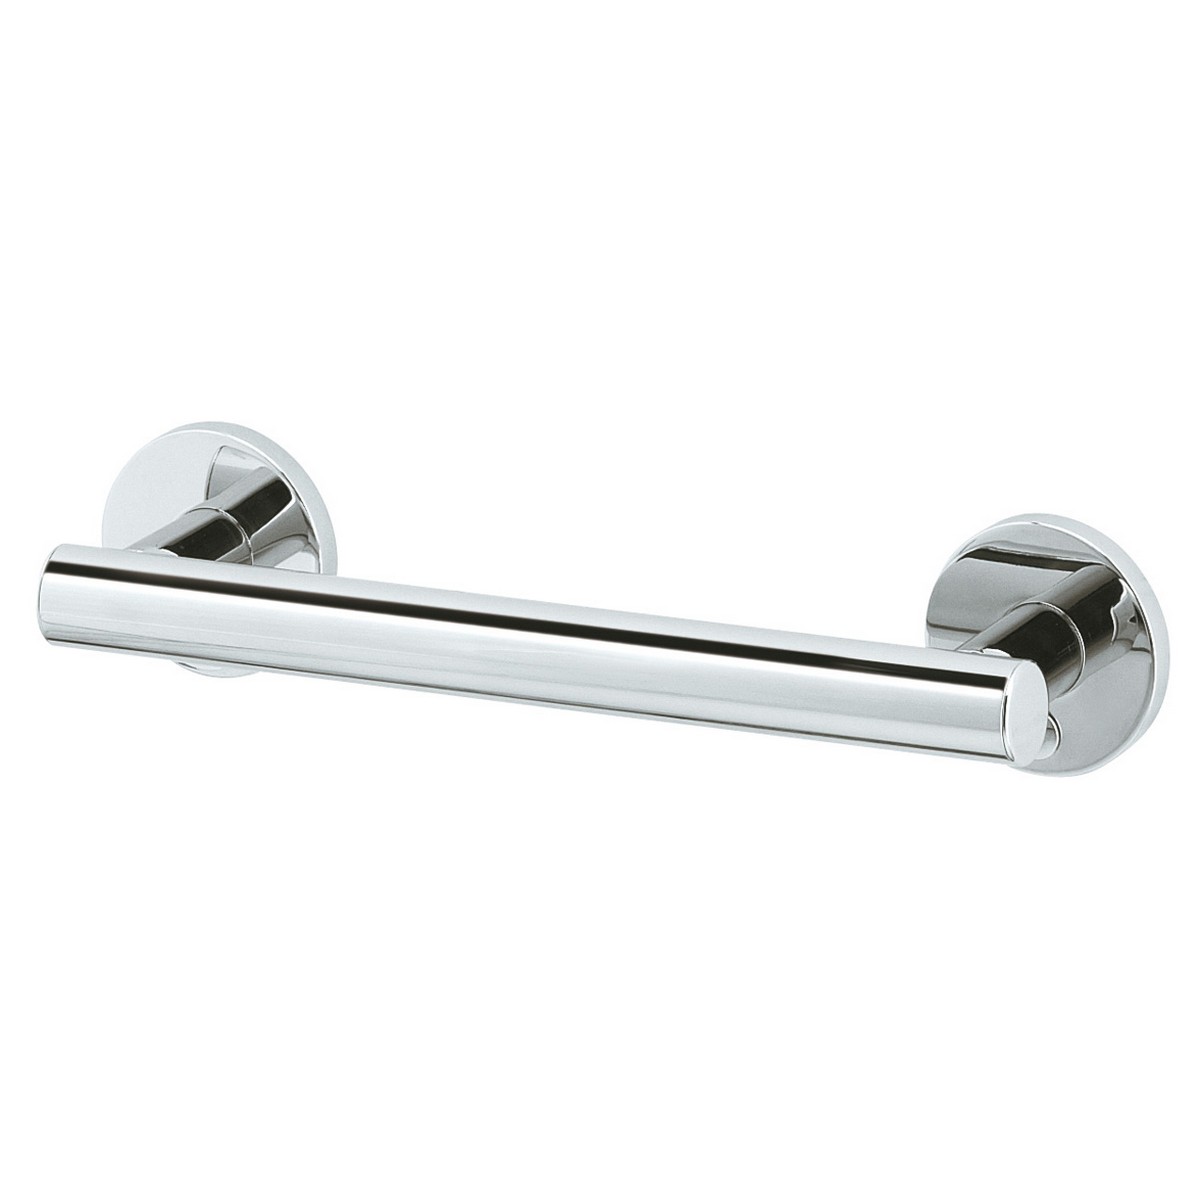 KEUCO 35901014800 PLAN CARE 48 INCH WALL MOUNTED SUPPORT RAIL IN POLISHED CHROME